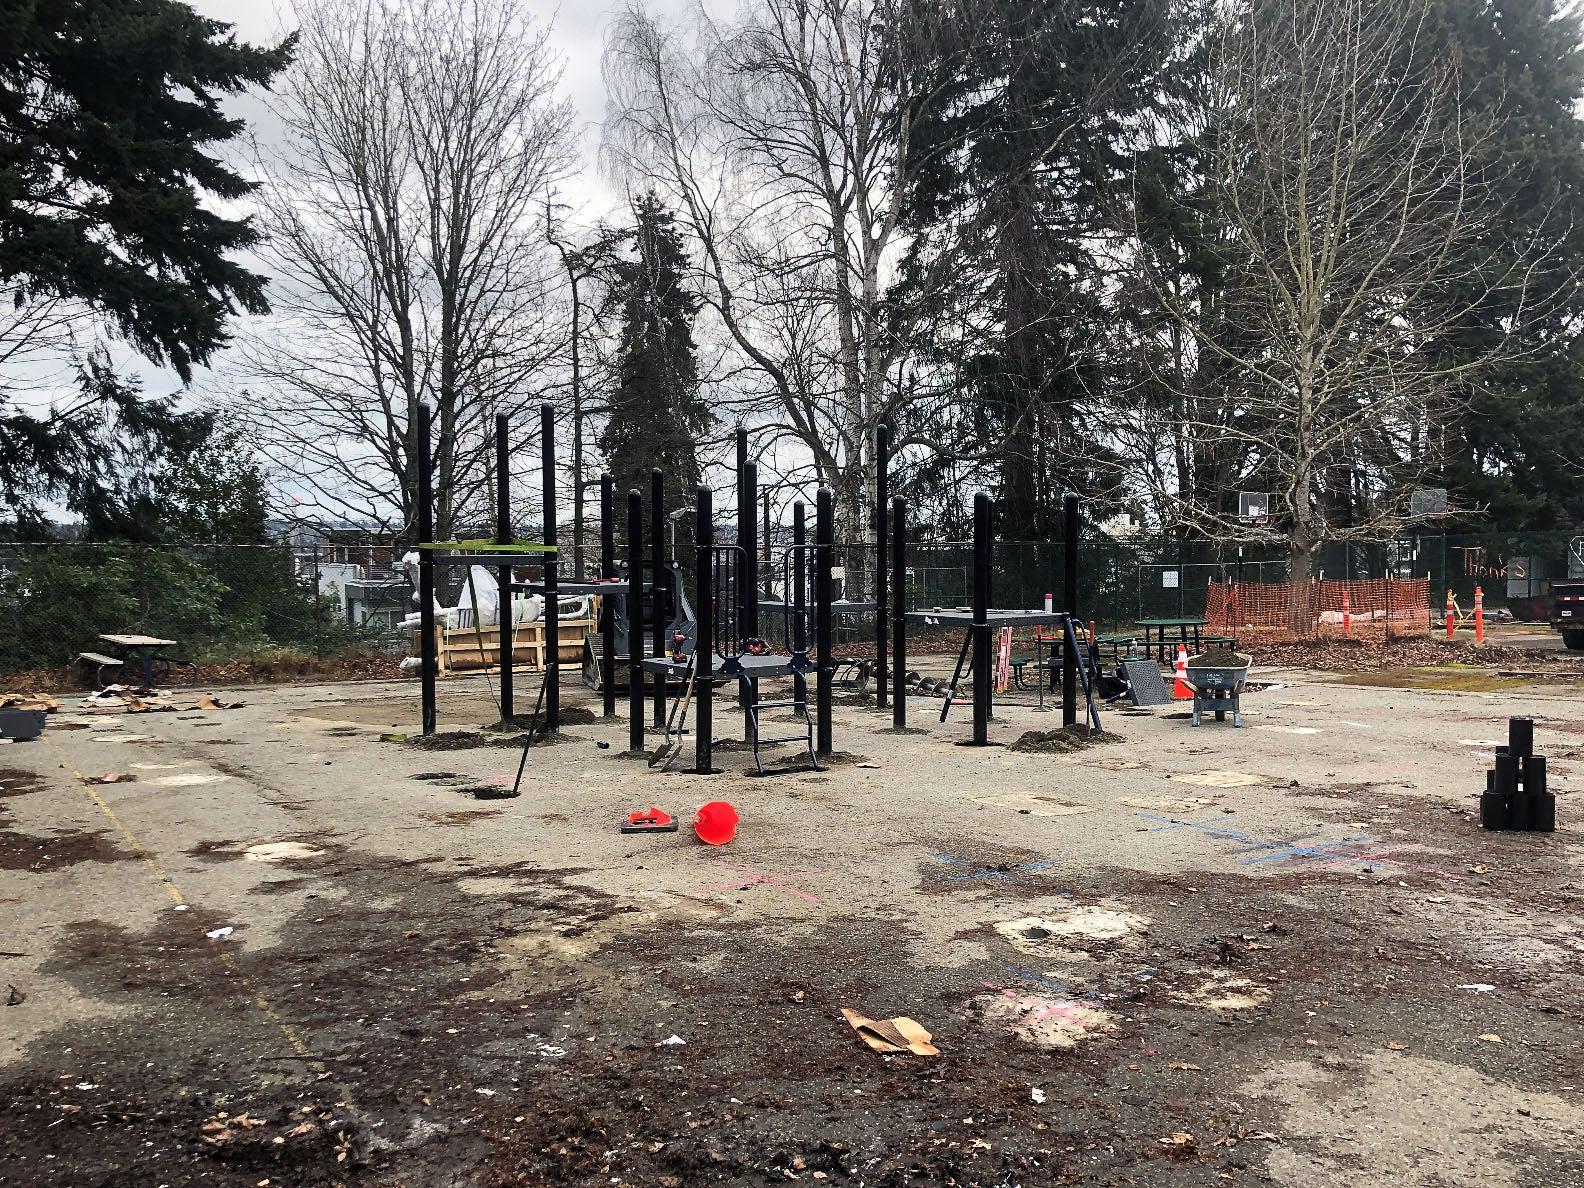 a concrete pad has part of a play structure installed. trees are in the background